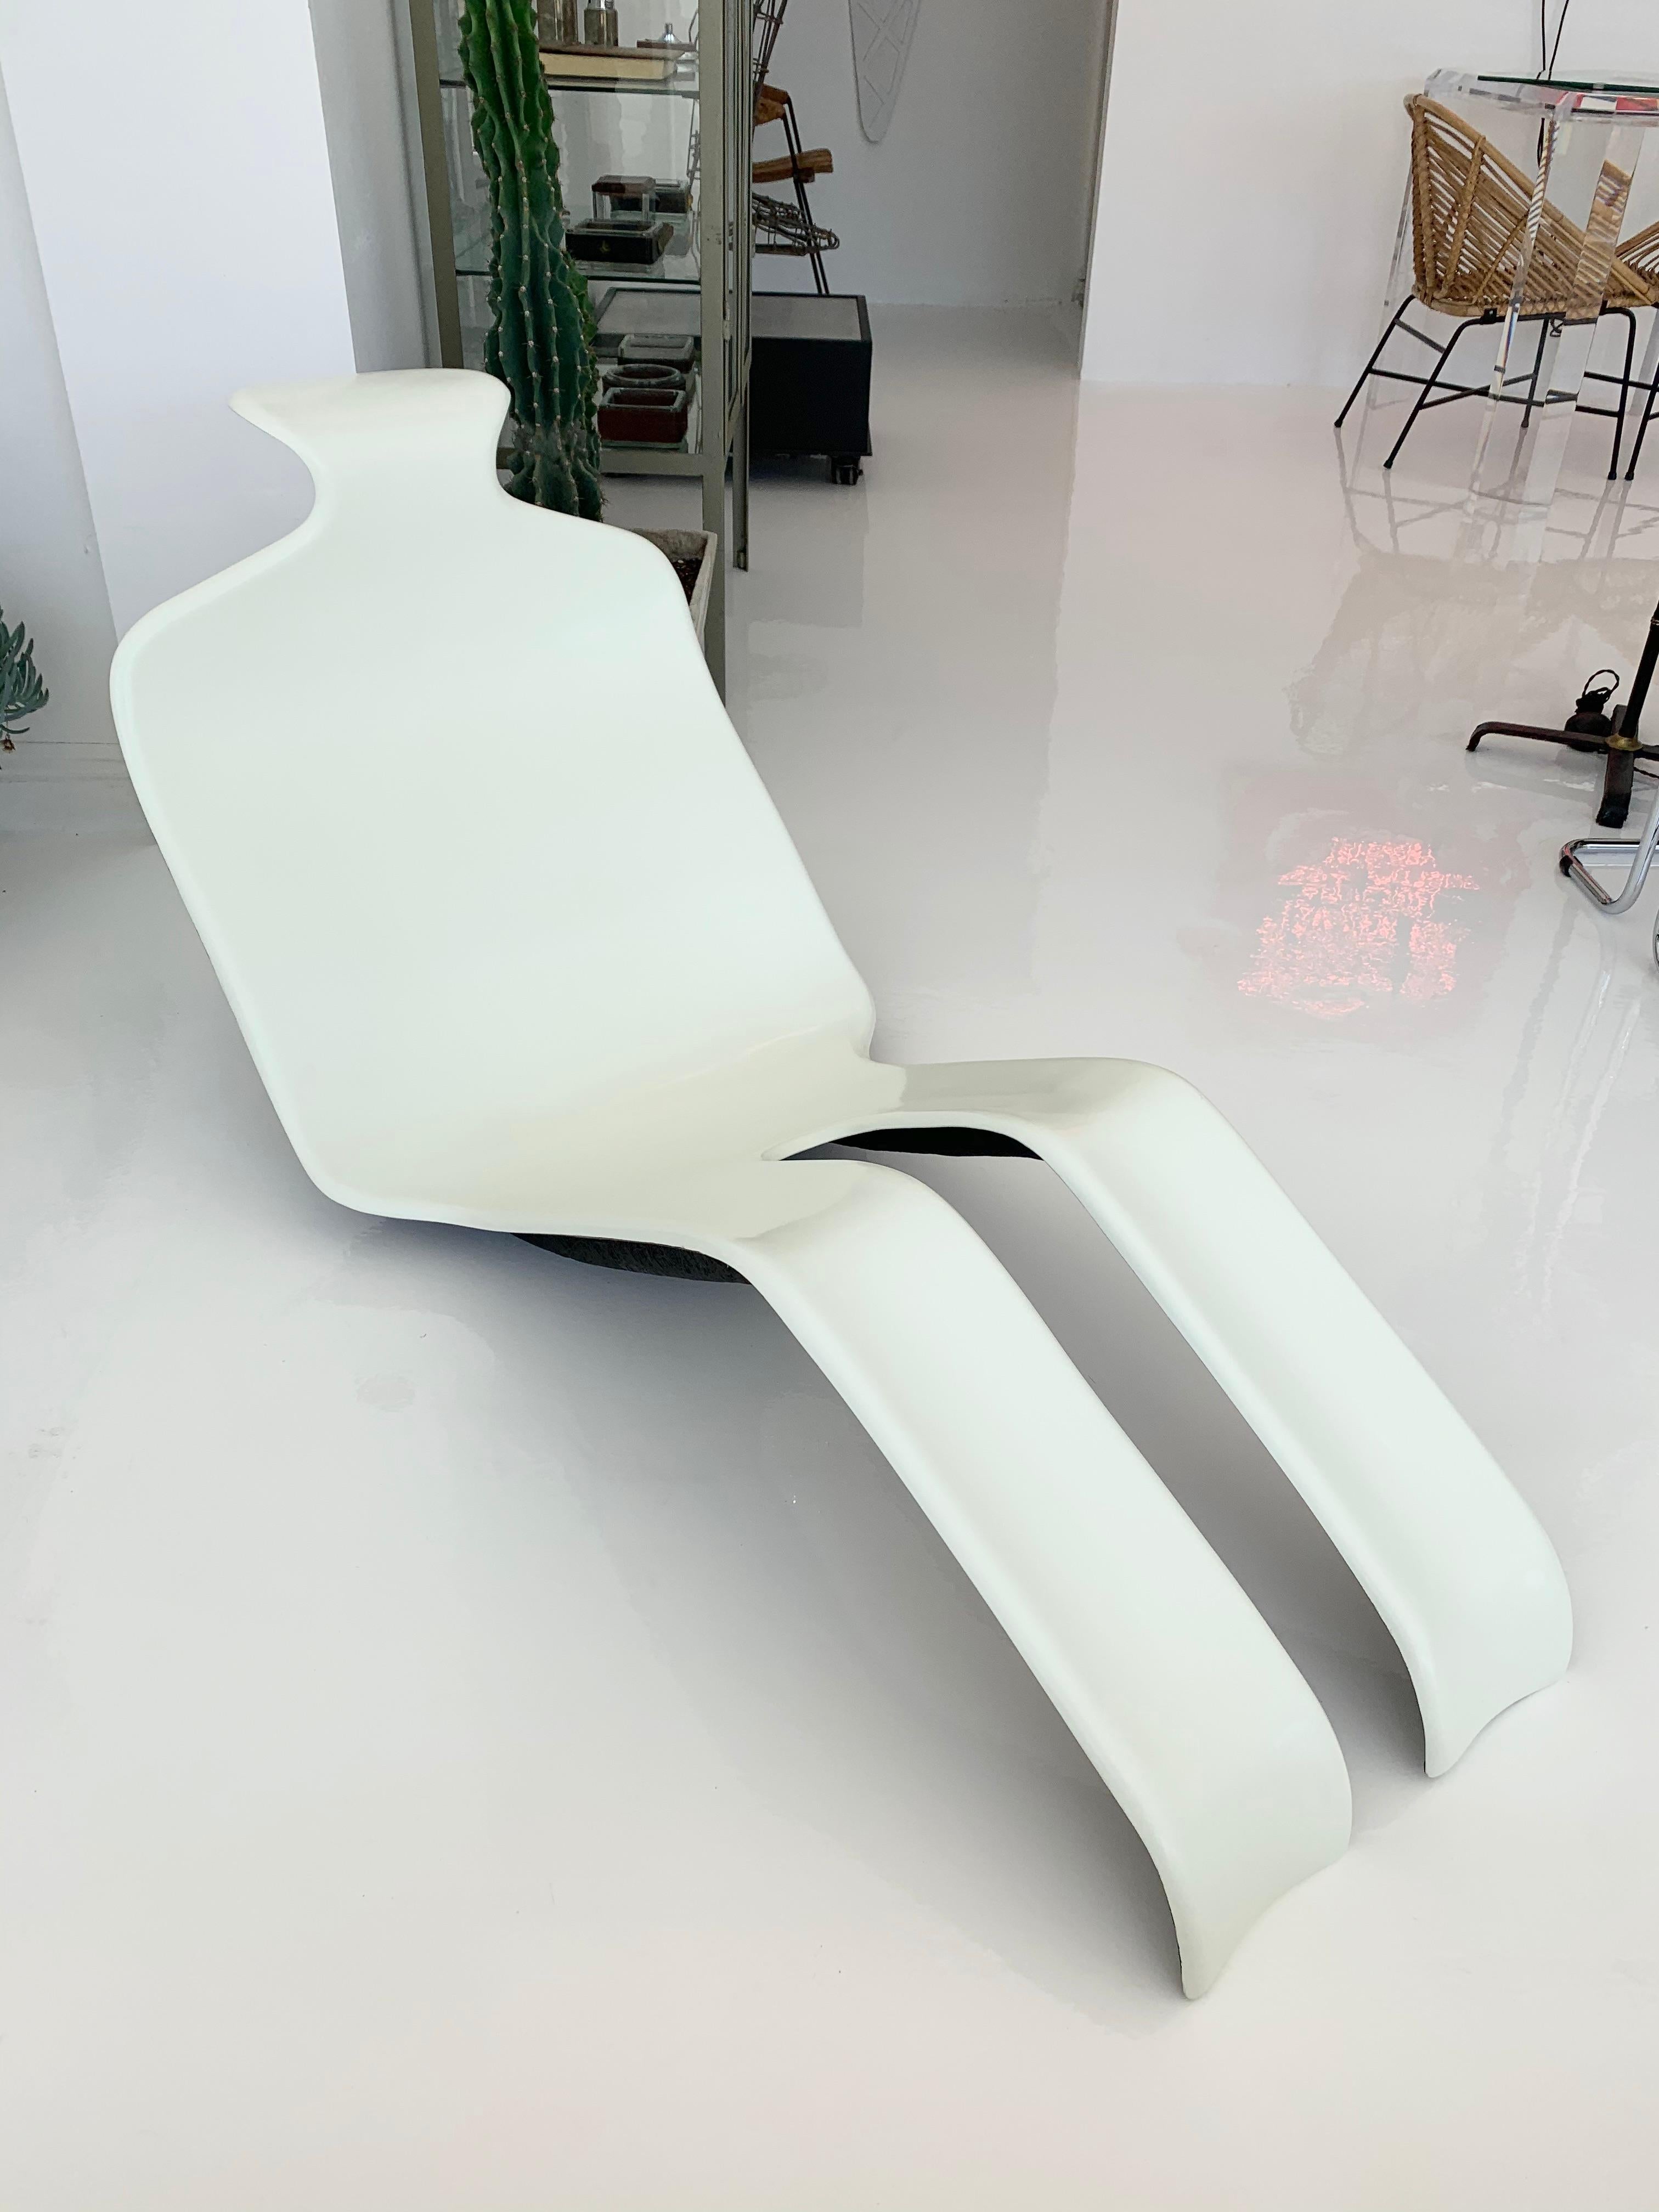 Great sculptural fiberglass lounge chairs by Olivier Mourgue for Airborne. Made in 1971. Excellent condition. Newly restored/painted in automotive paint which holds up really well outdoors.  Cool piece of art for indoors or outside by the pool. Very